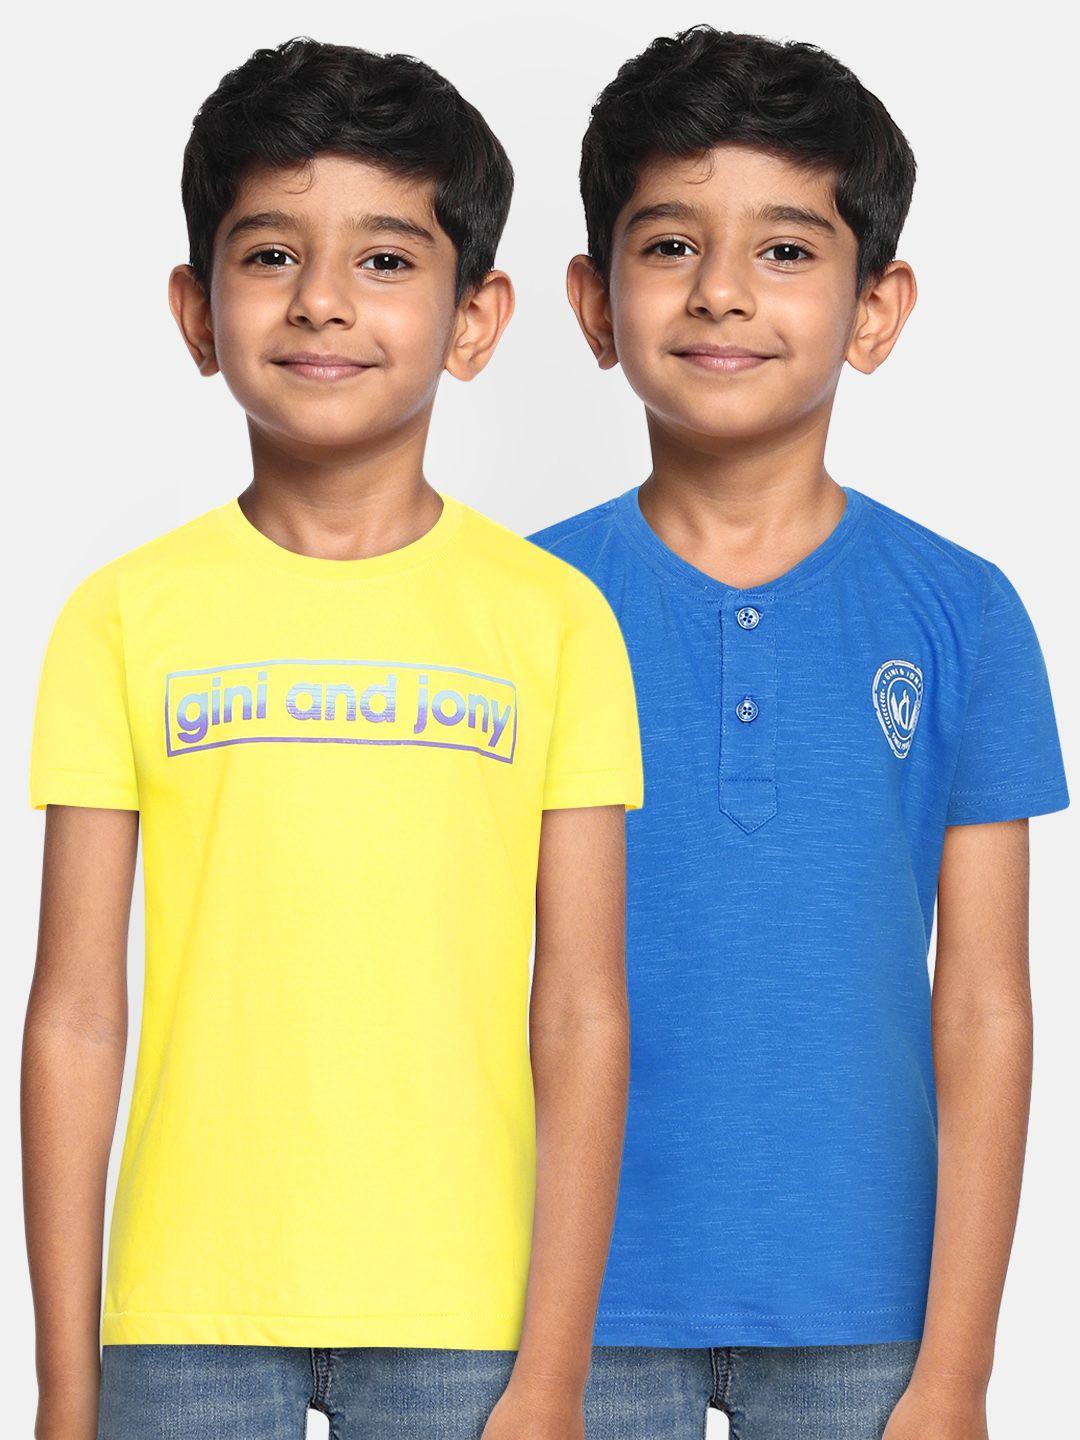 gini and jony boys pack of 2 pure cotton round neck t-shirts